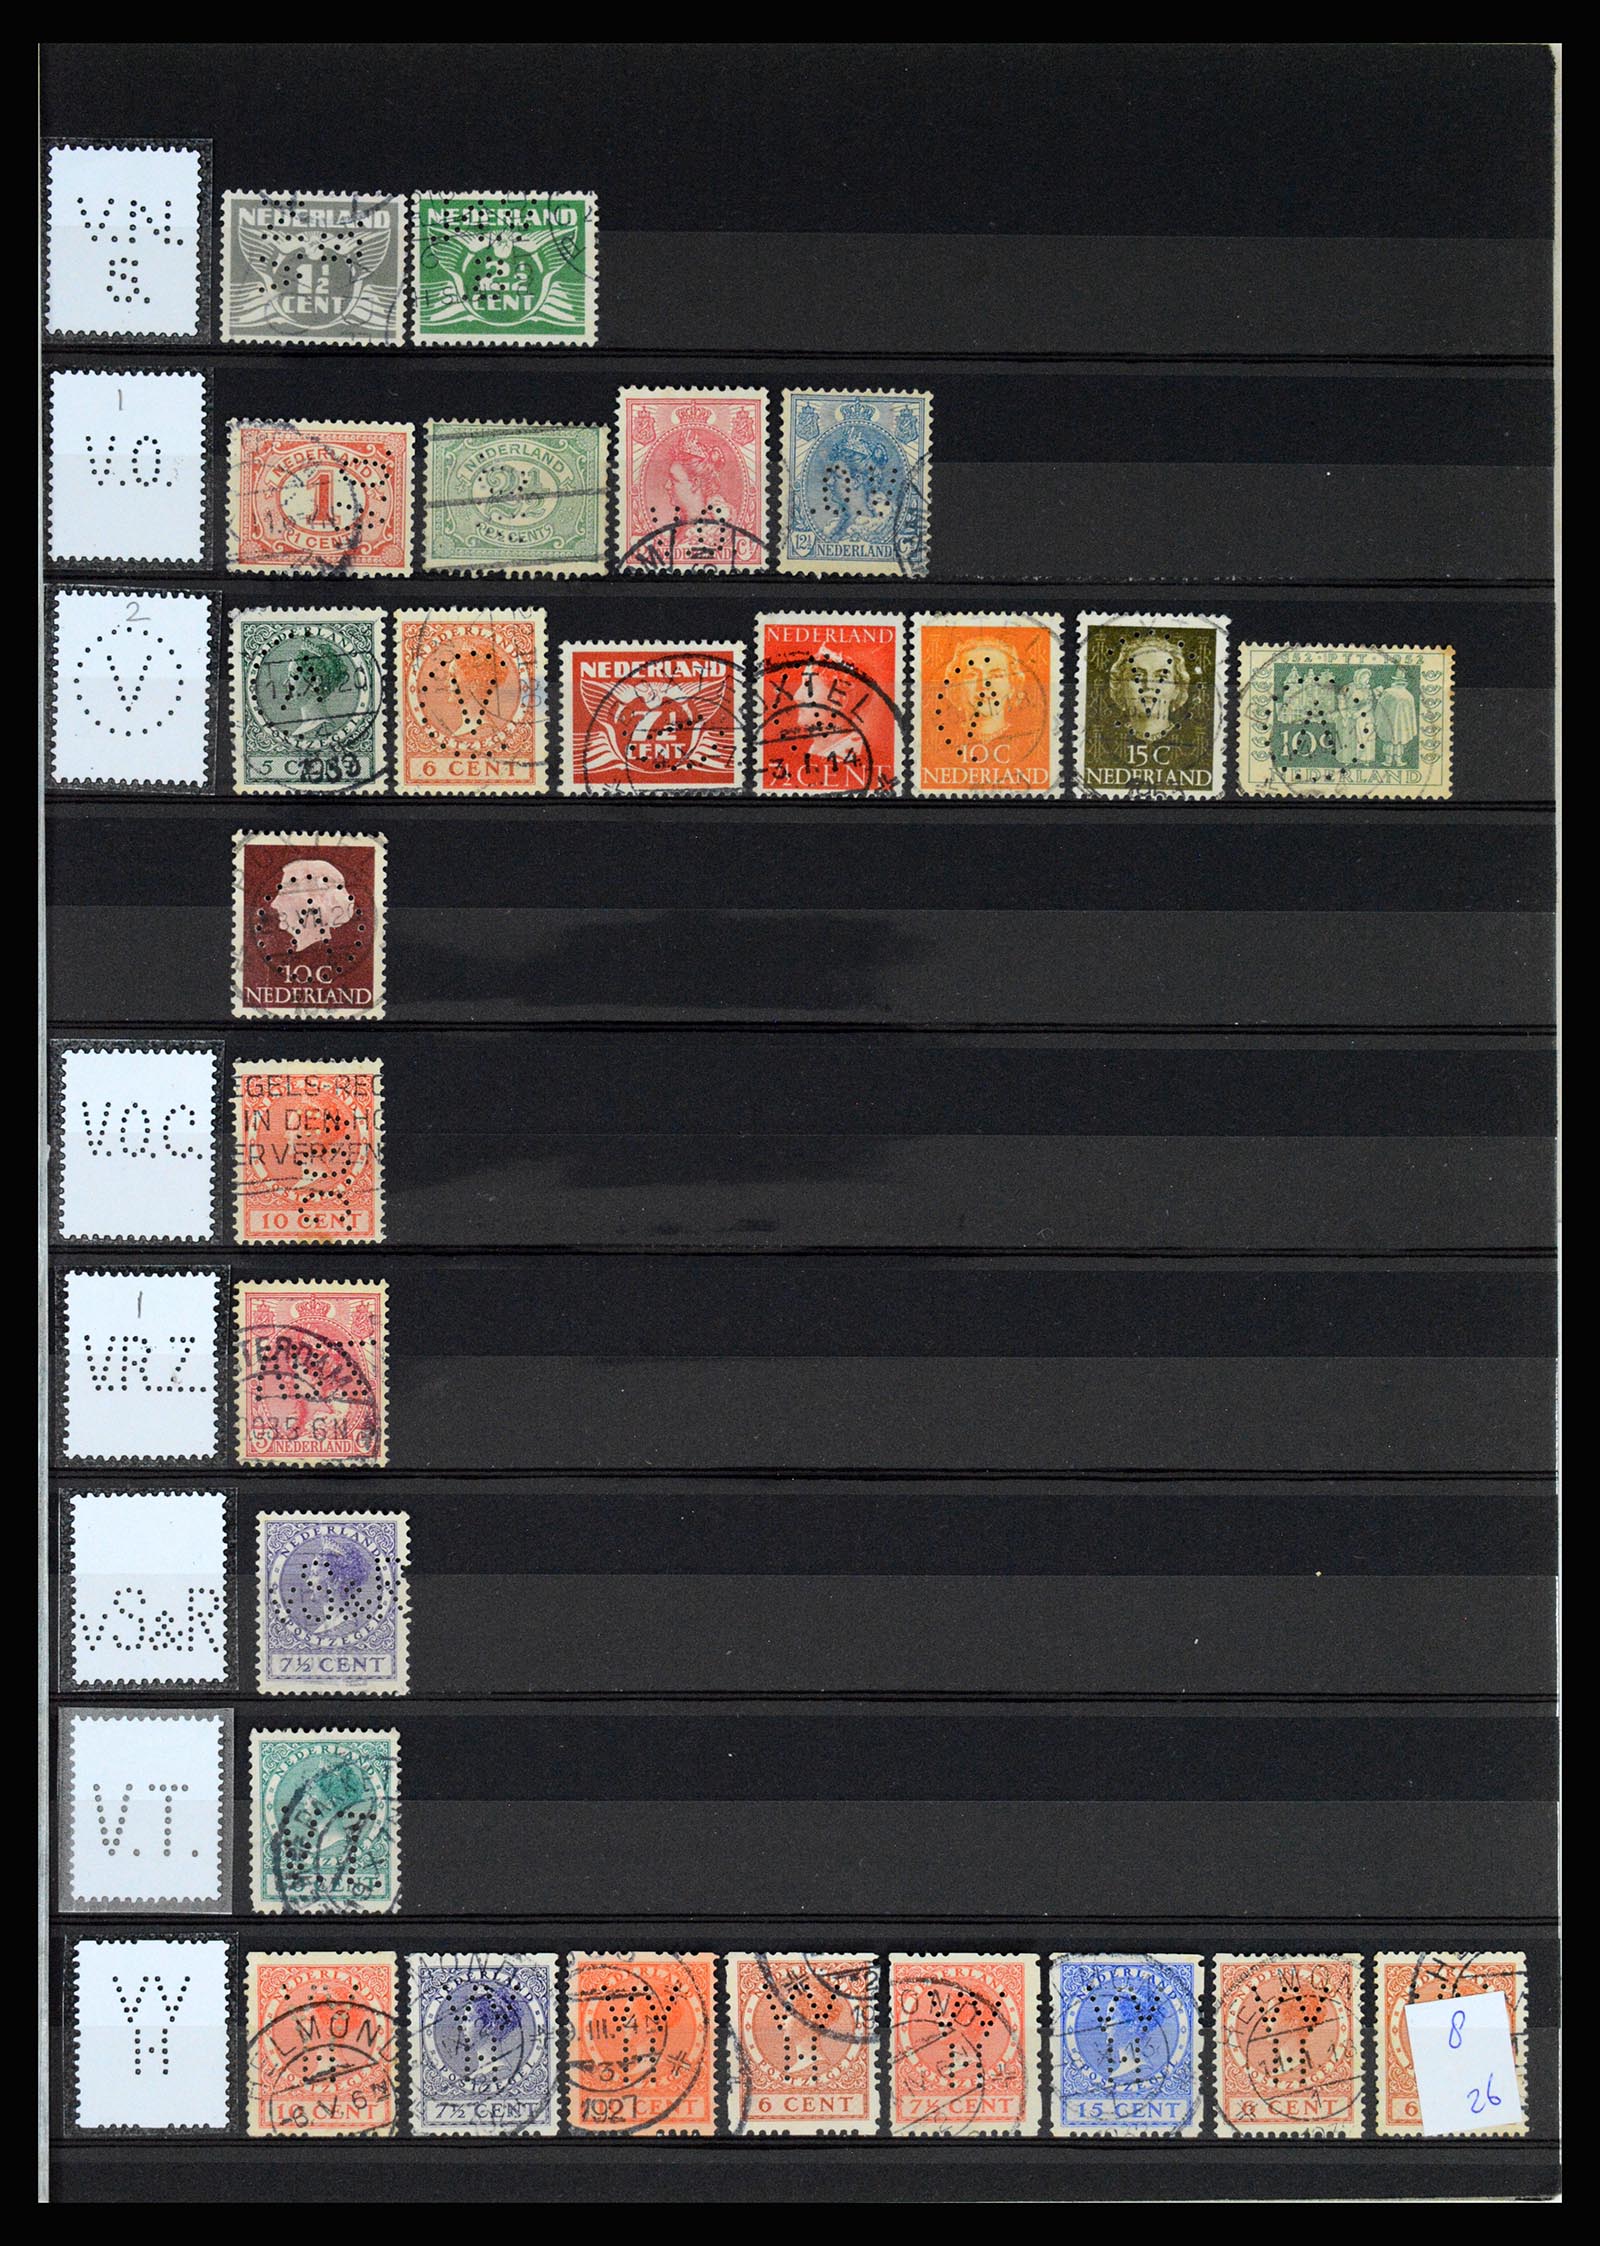 37183 054 - Stamp collection 37183 Netherlands perfins 1872-1960.